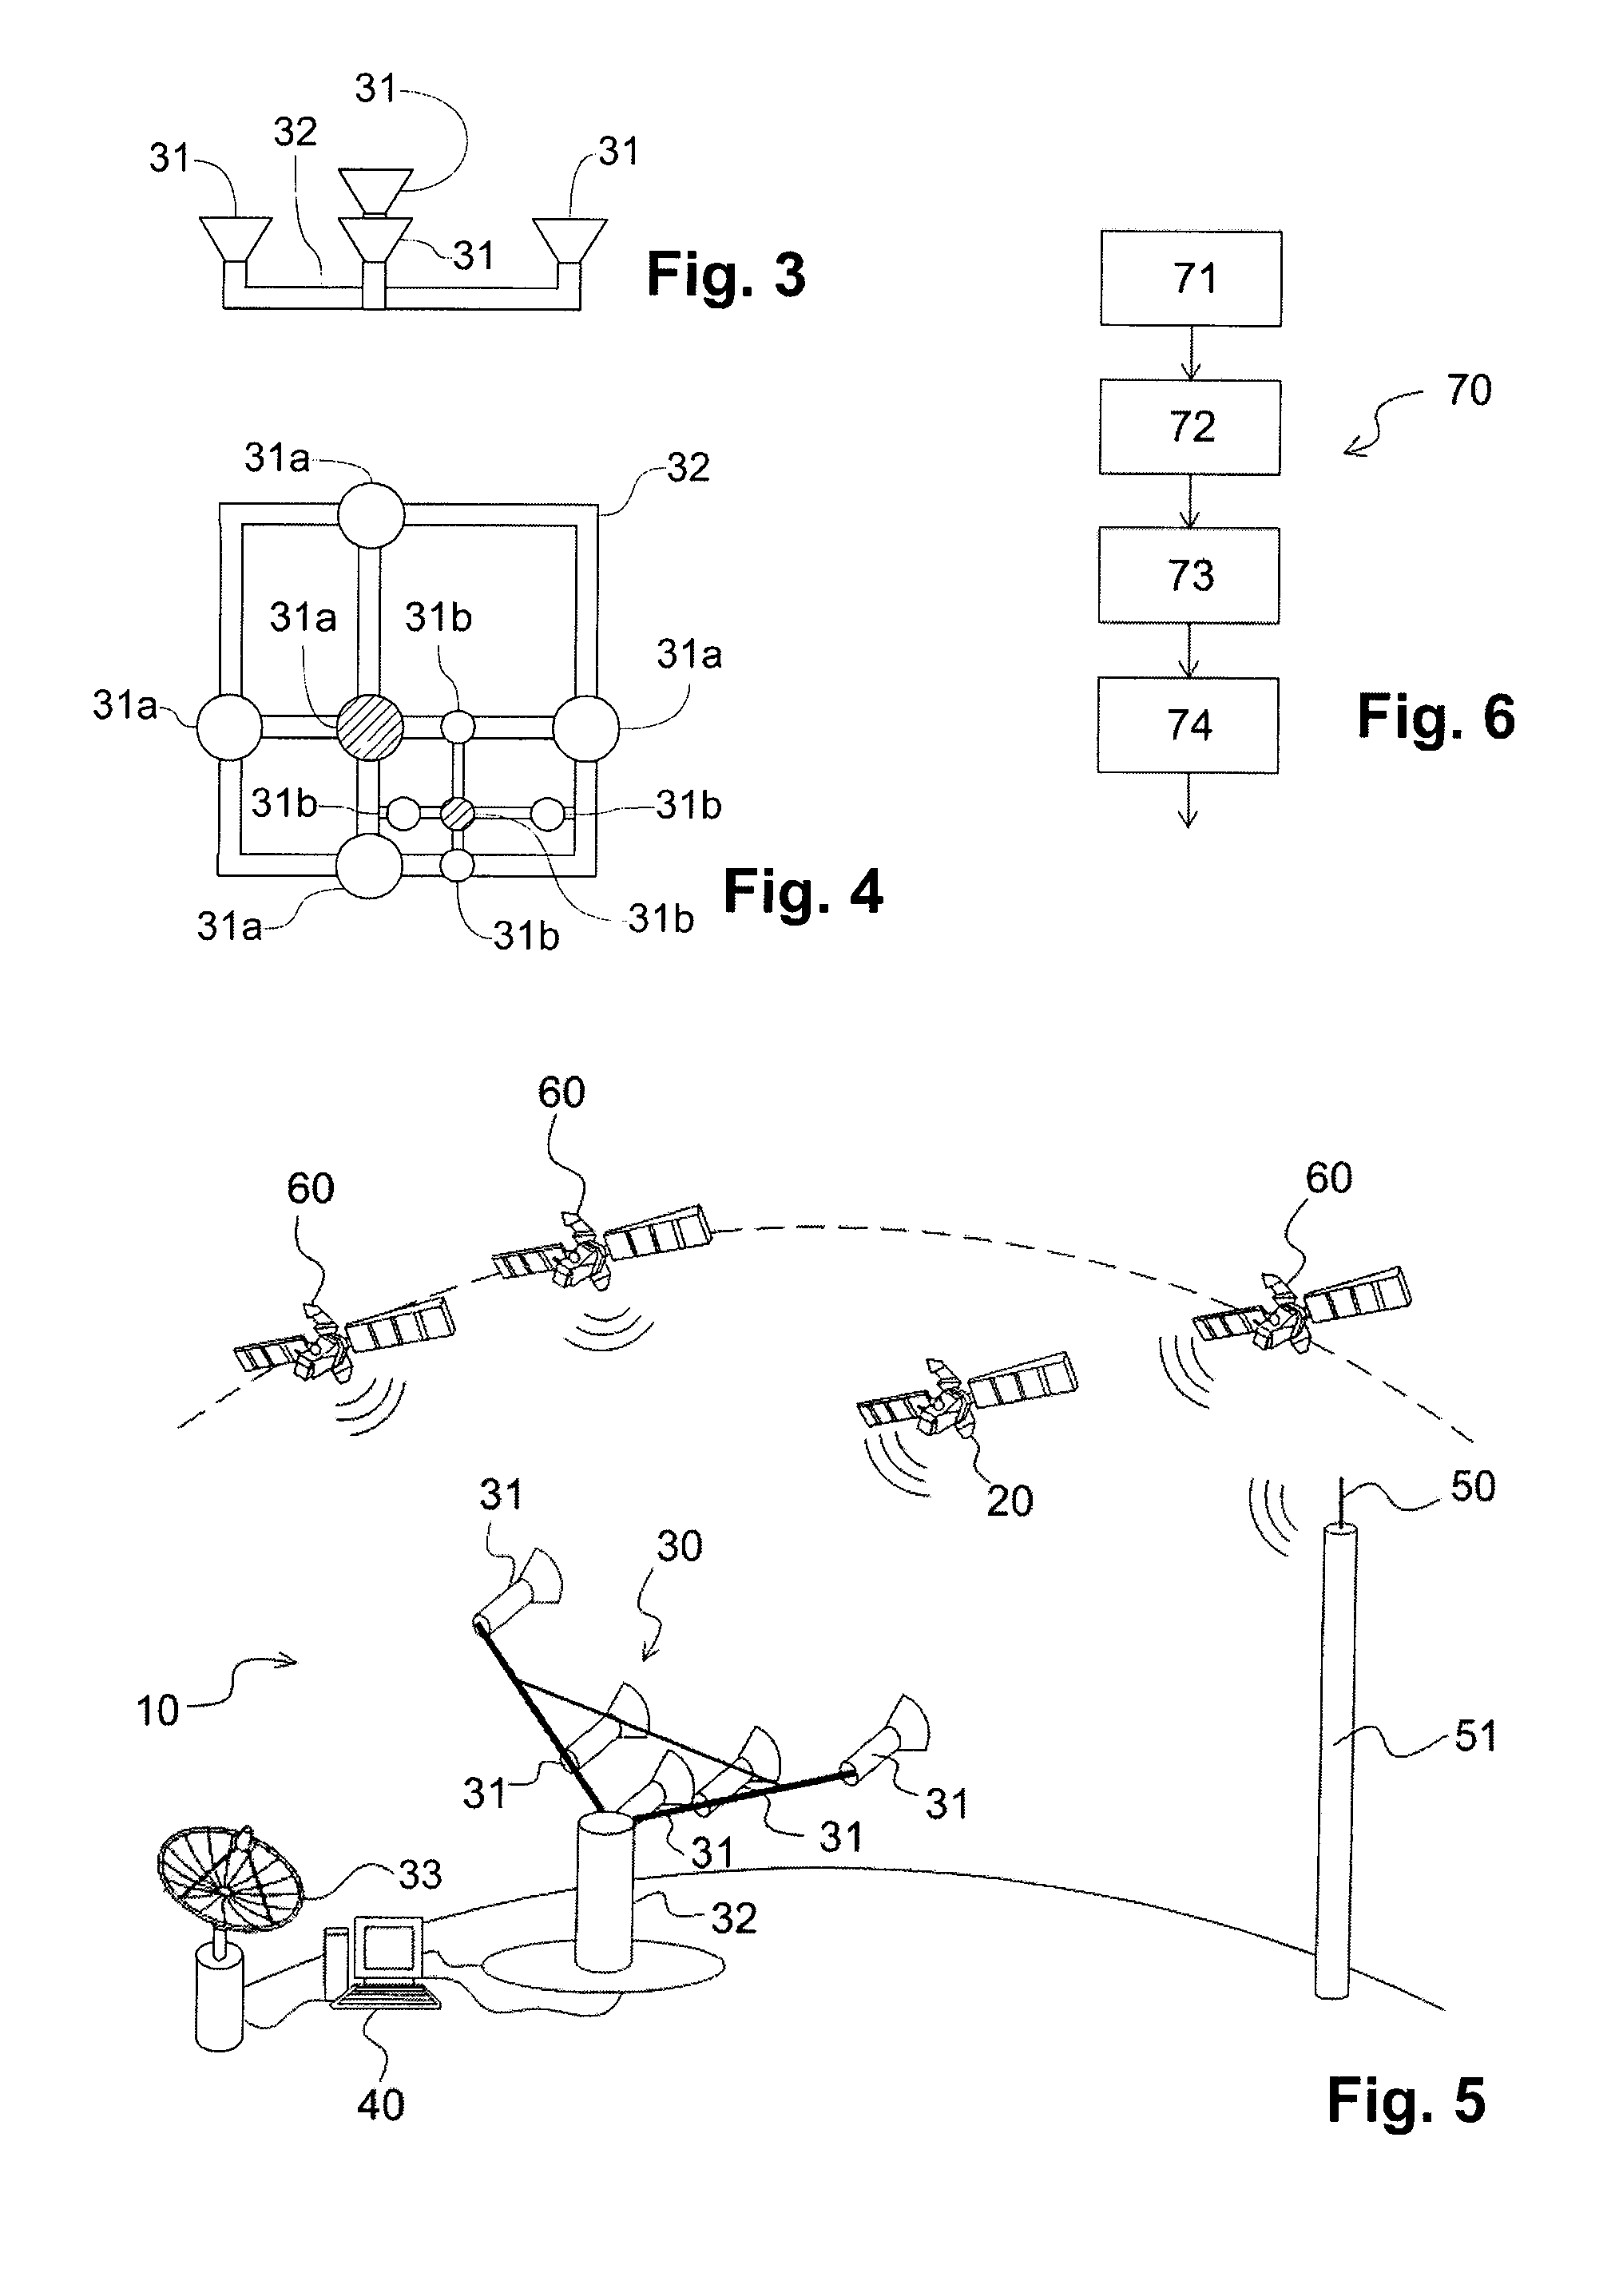 Method and system for monitoring a phase for transferring a satellite from an intial orbit to a mission orbit